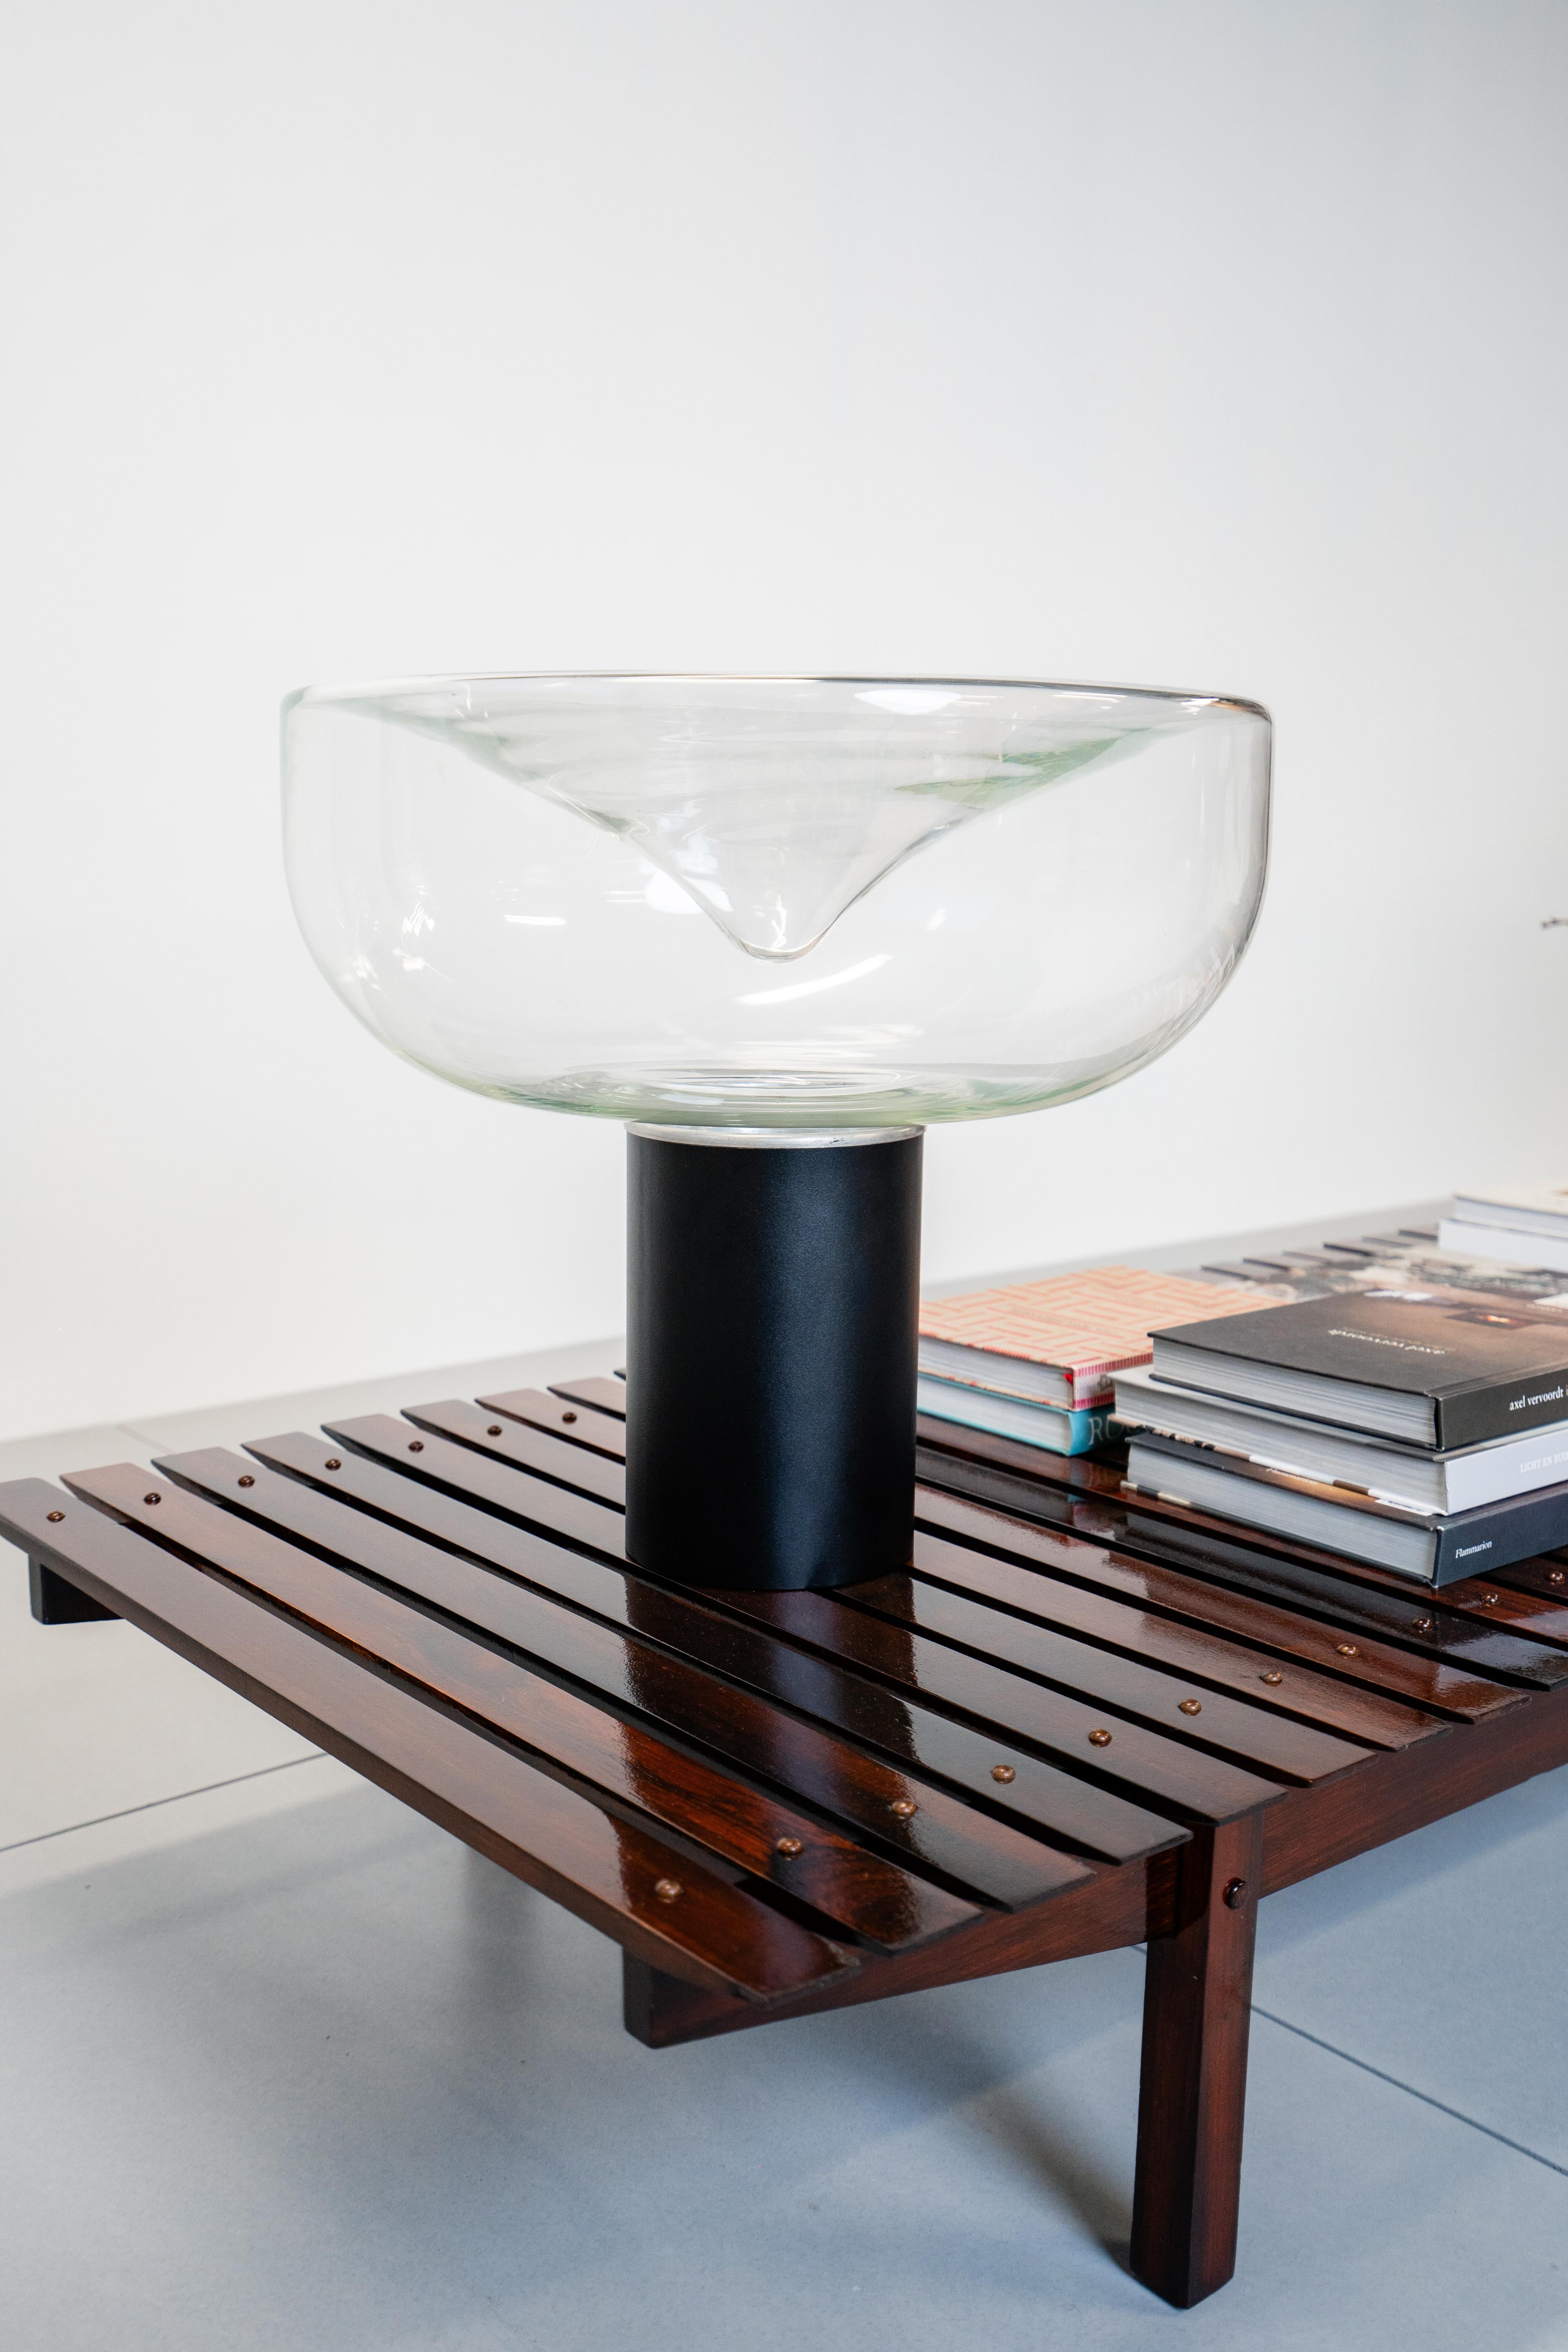 Table lamp mod. Aella designed by Renato Toso and Giovanna Noti Massari in 1966.
Painted aluminium base, blown glass shade, large version.
Named after a mythological amazon, this important historical table lamp by Leucos fascinates with its